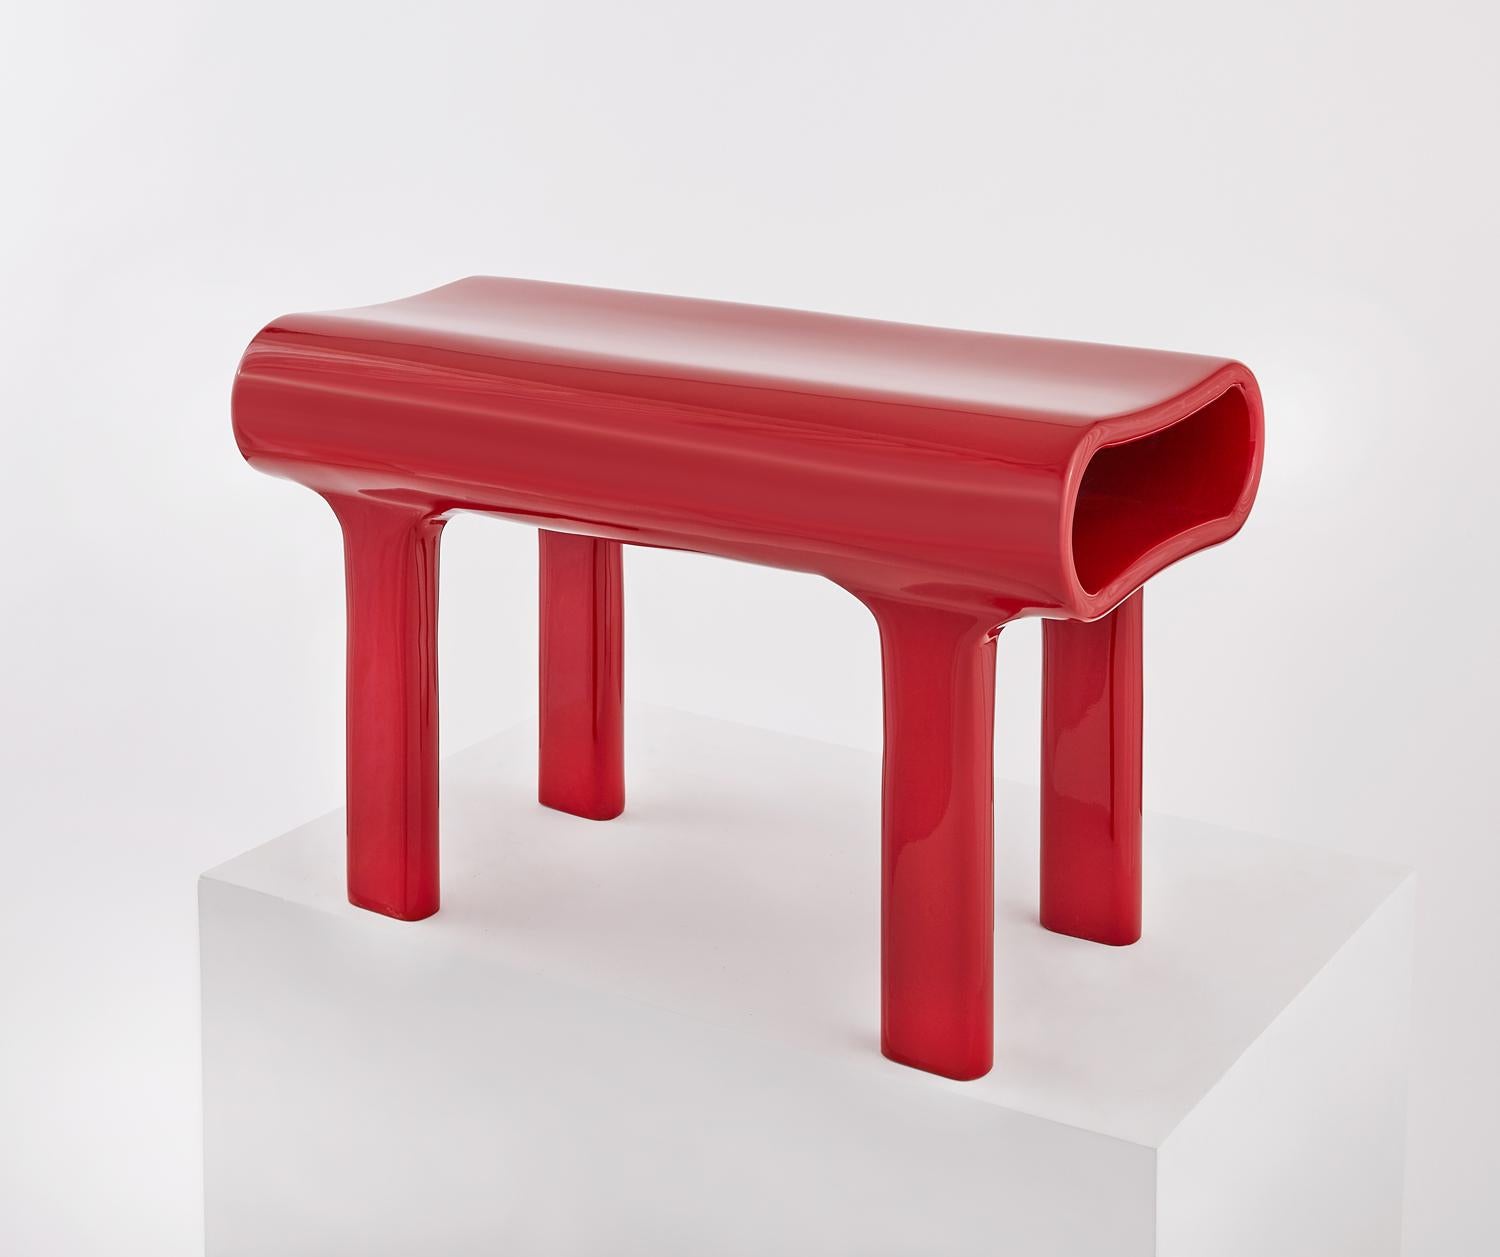 Minimalist Contemporary Sculpted Red Wood Bench with Acrylic Finish For Sale